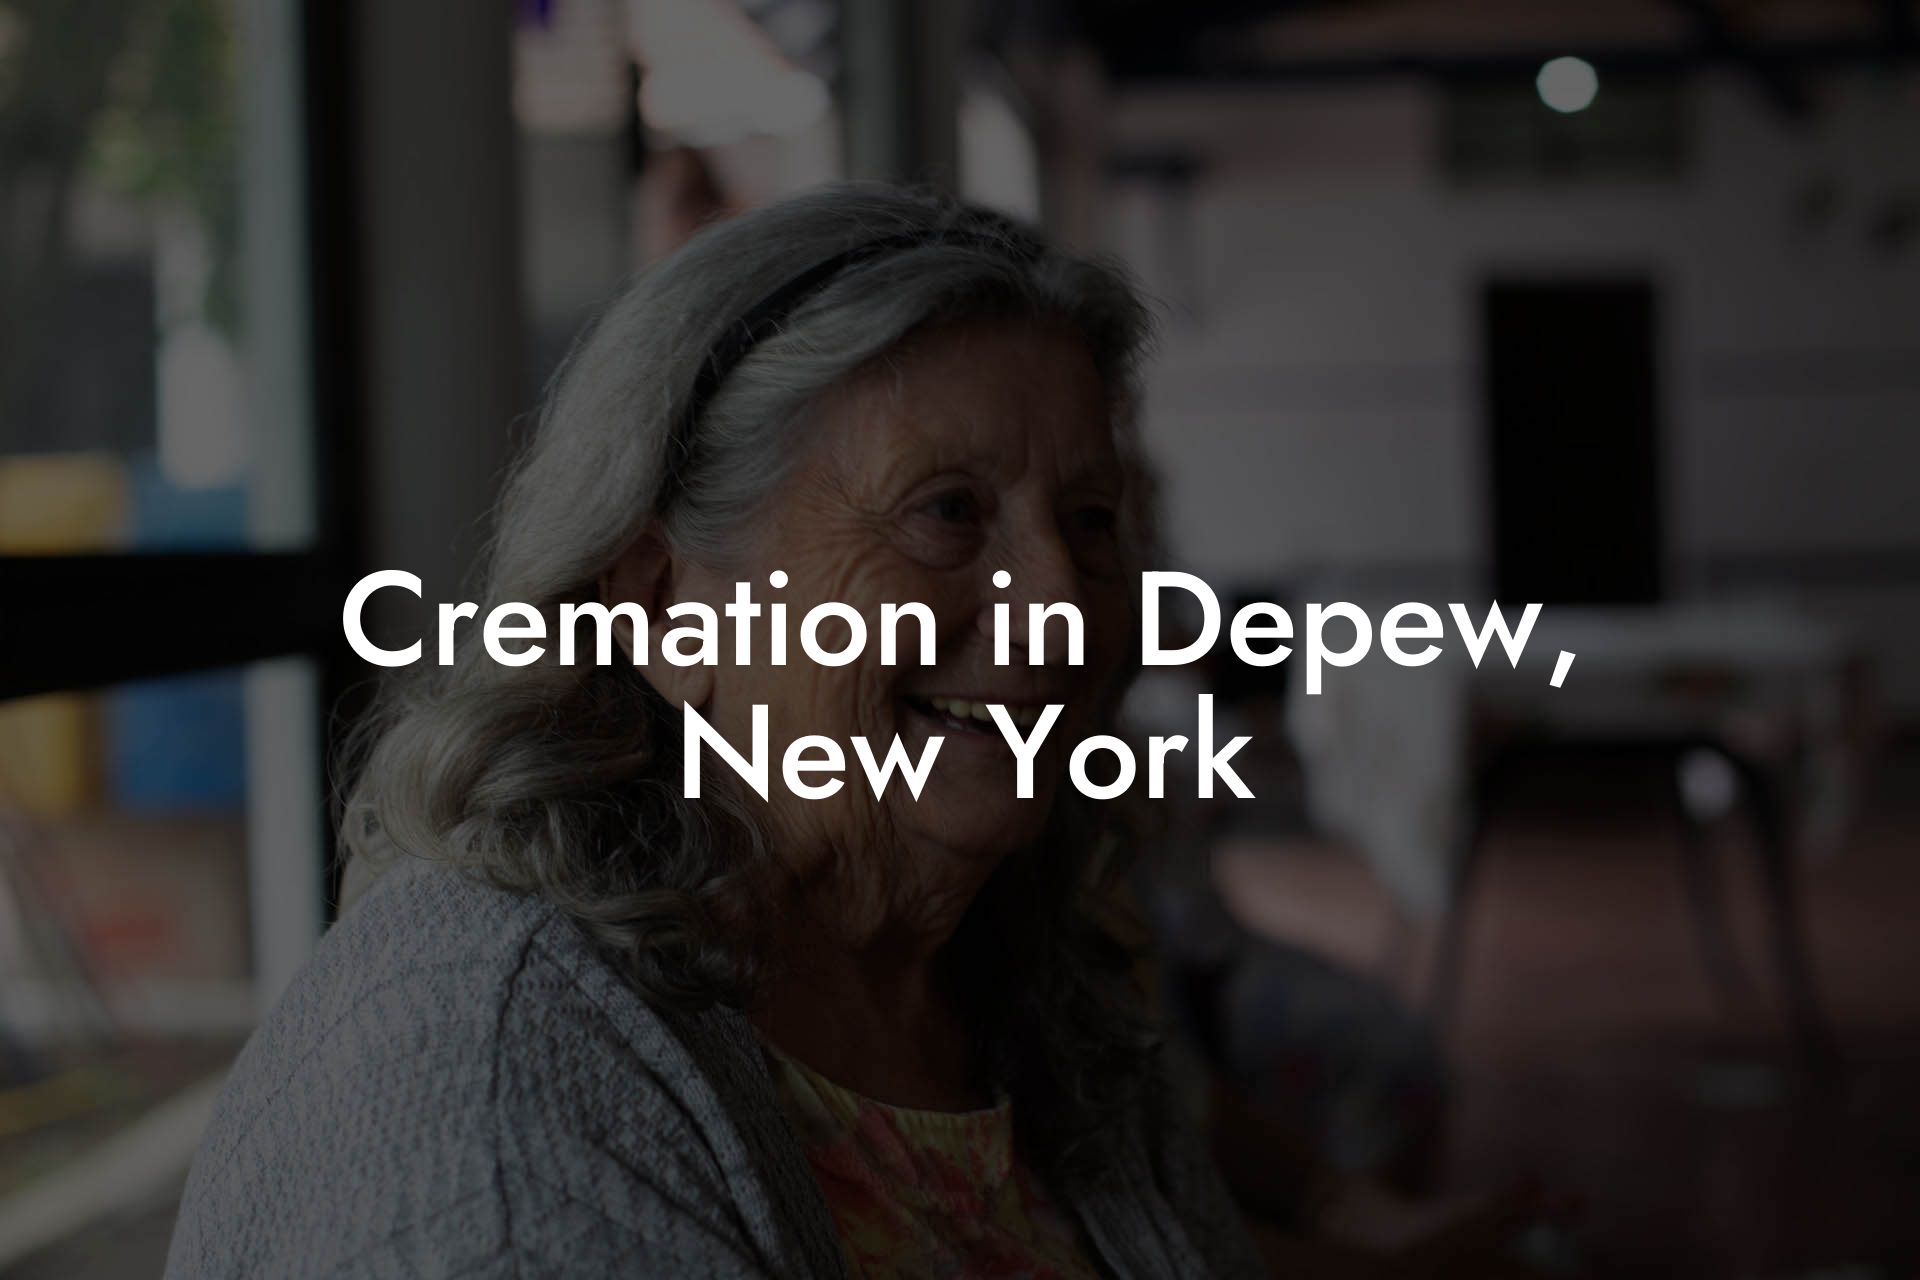 Cremation in Depew, New York